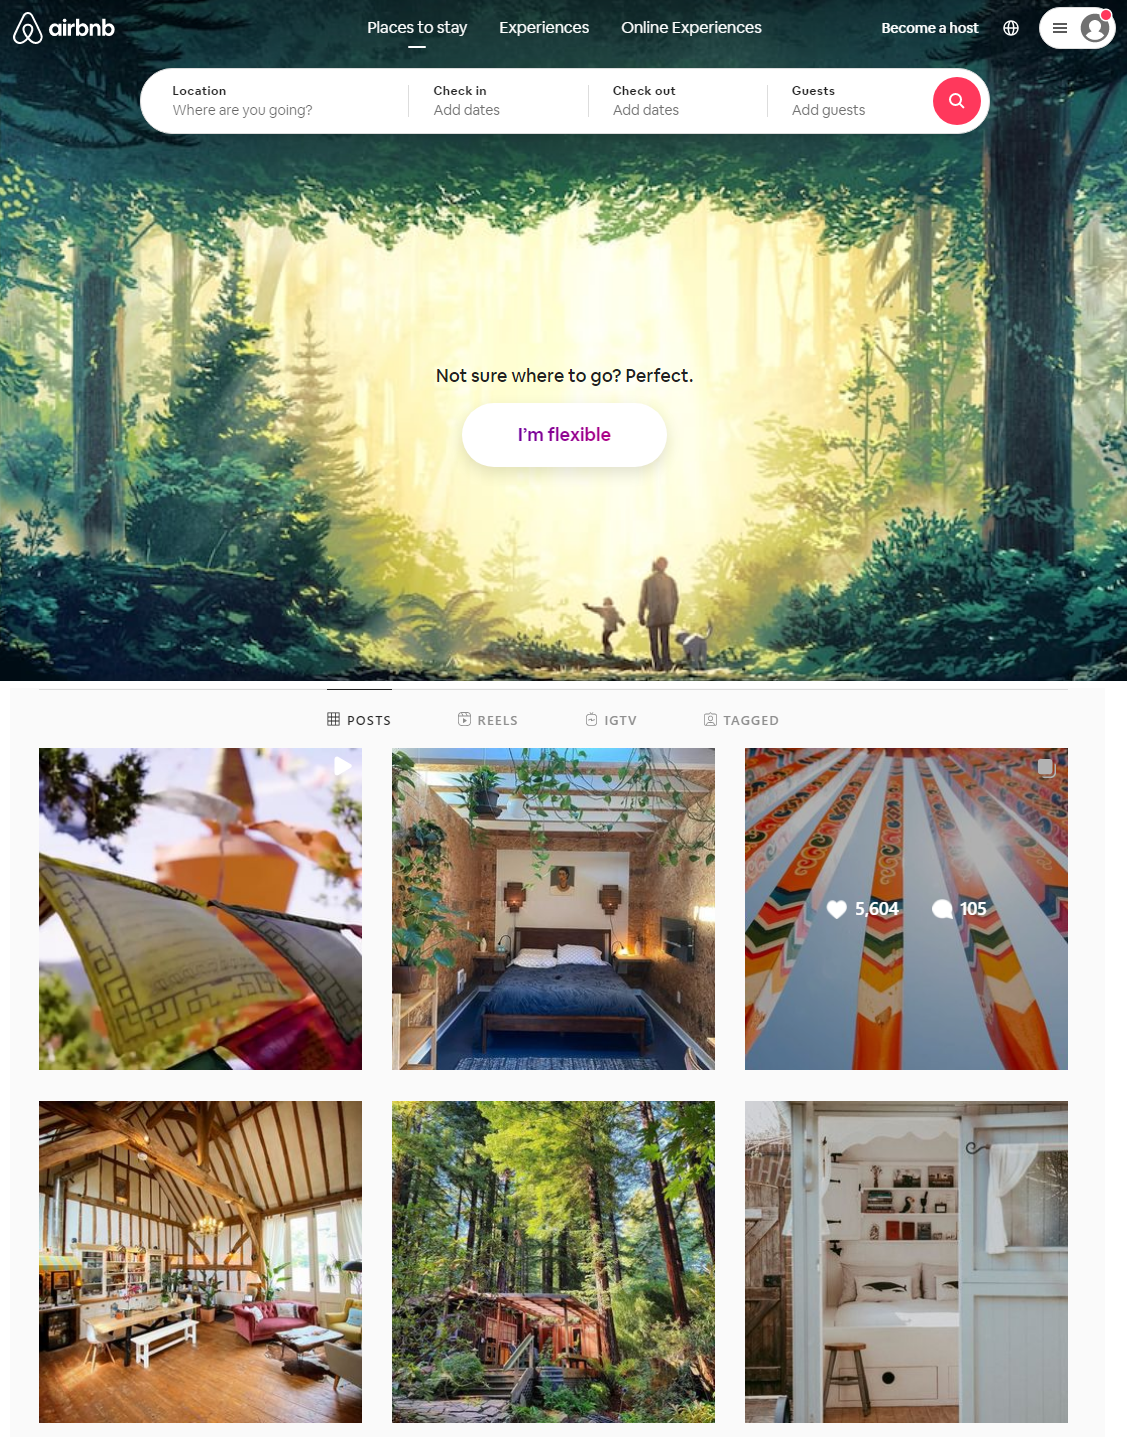 airbnb website and instagram profile